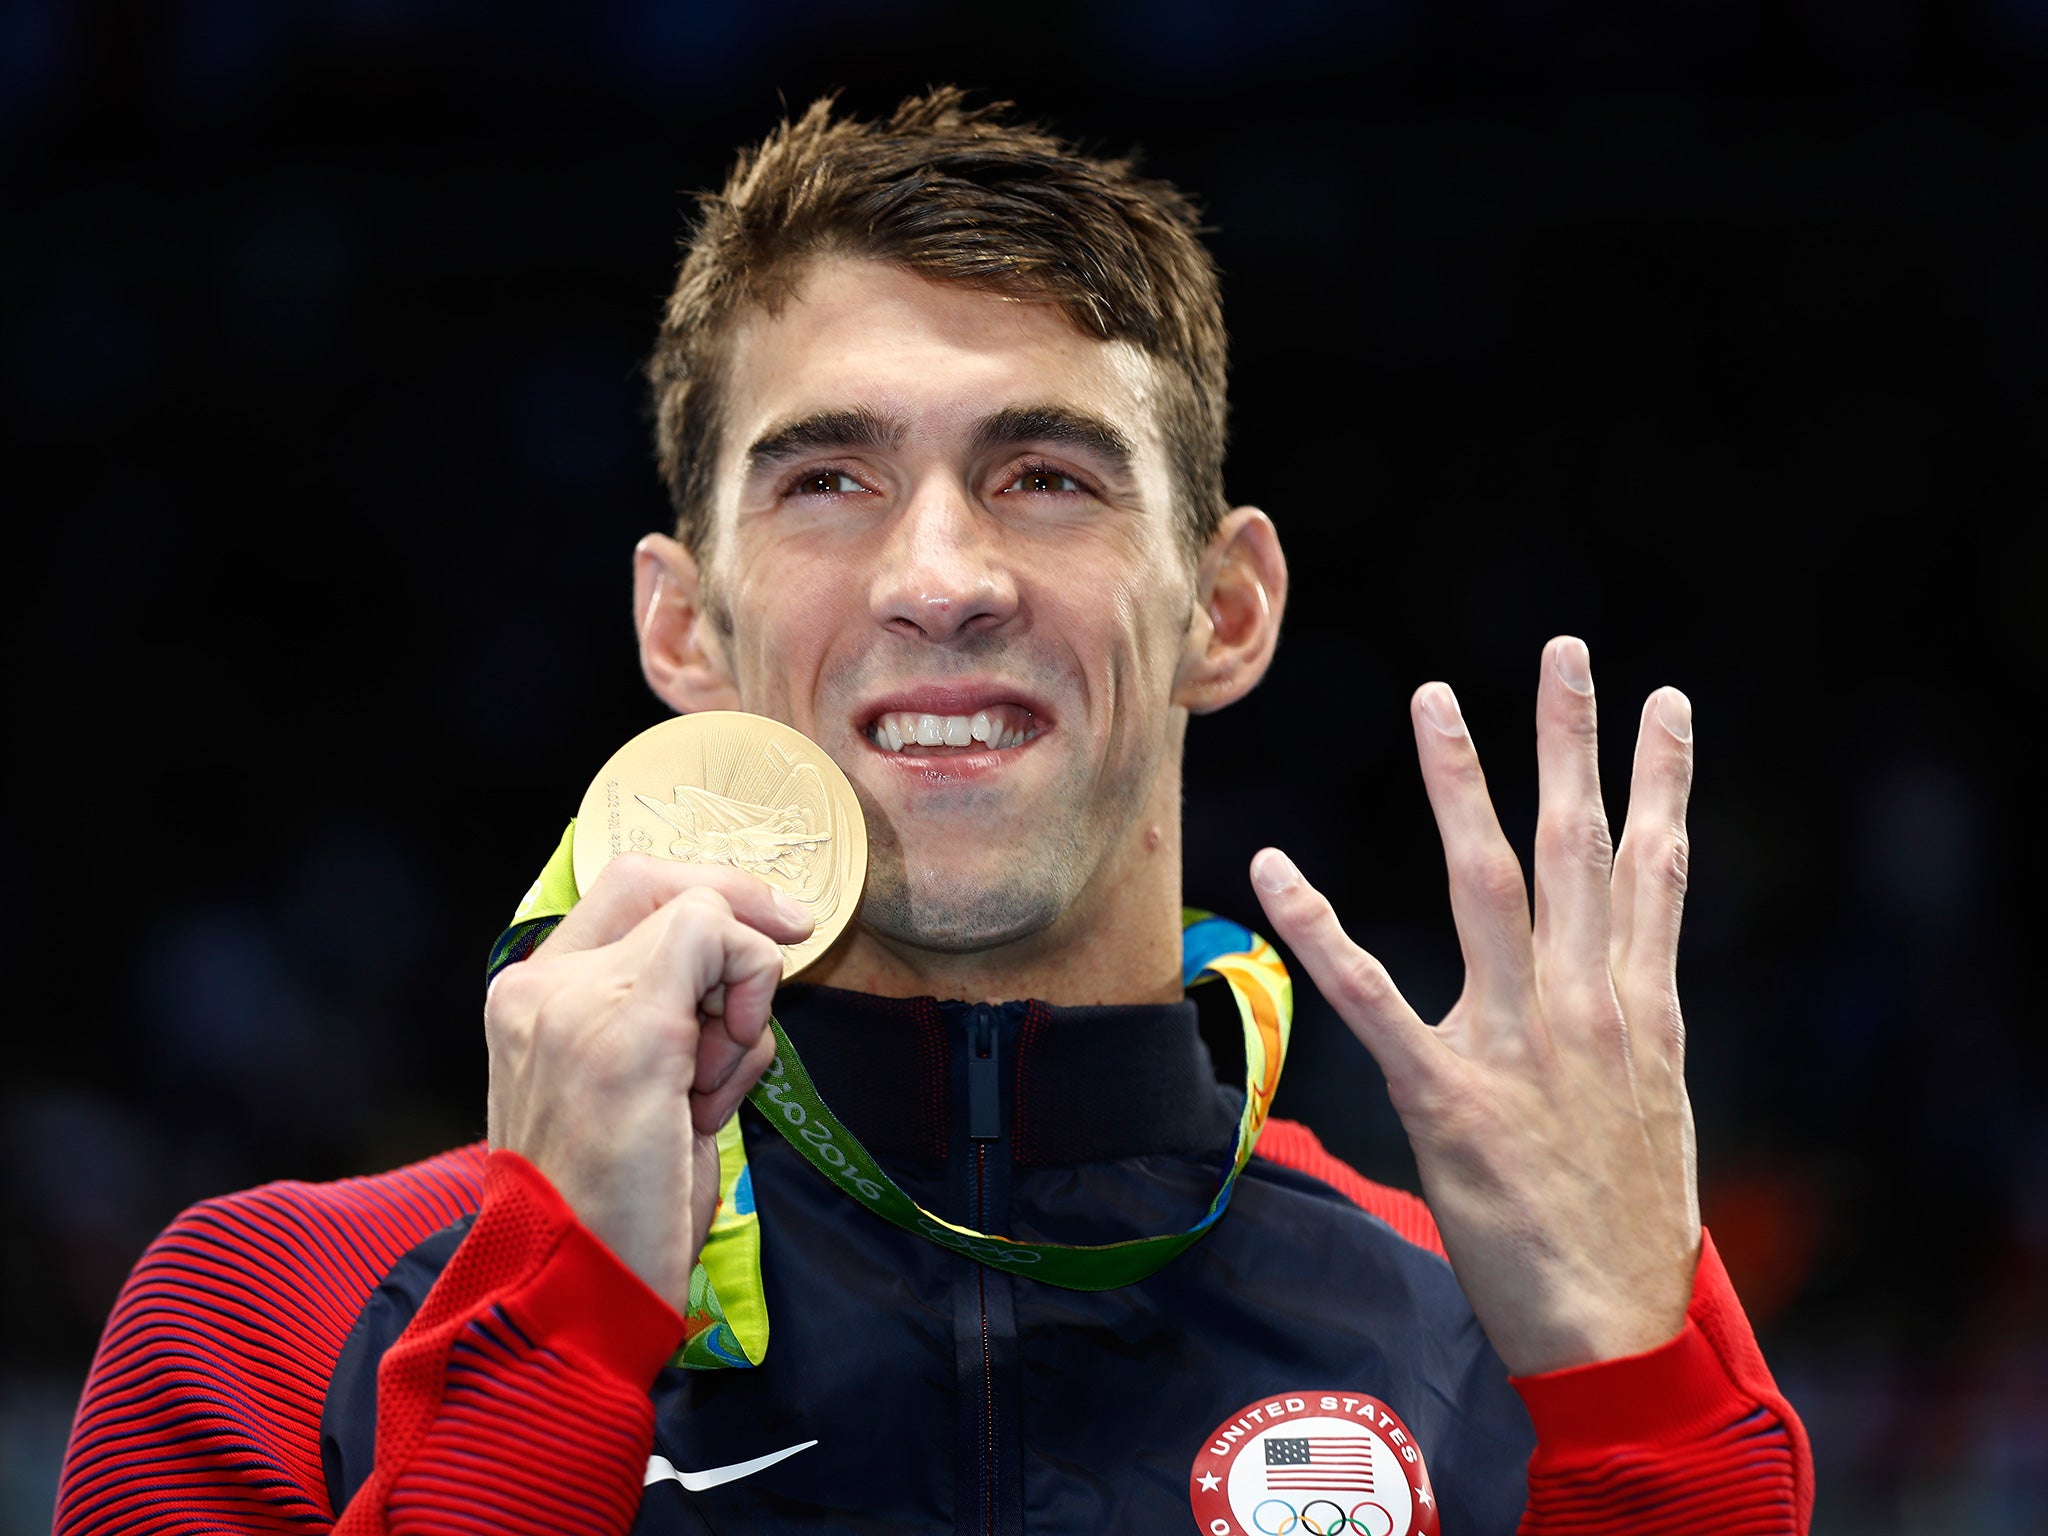 Phelps poses with his 22nd Olympic gold medal